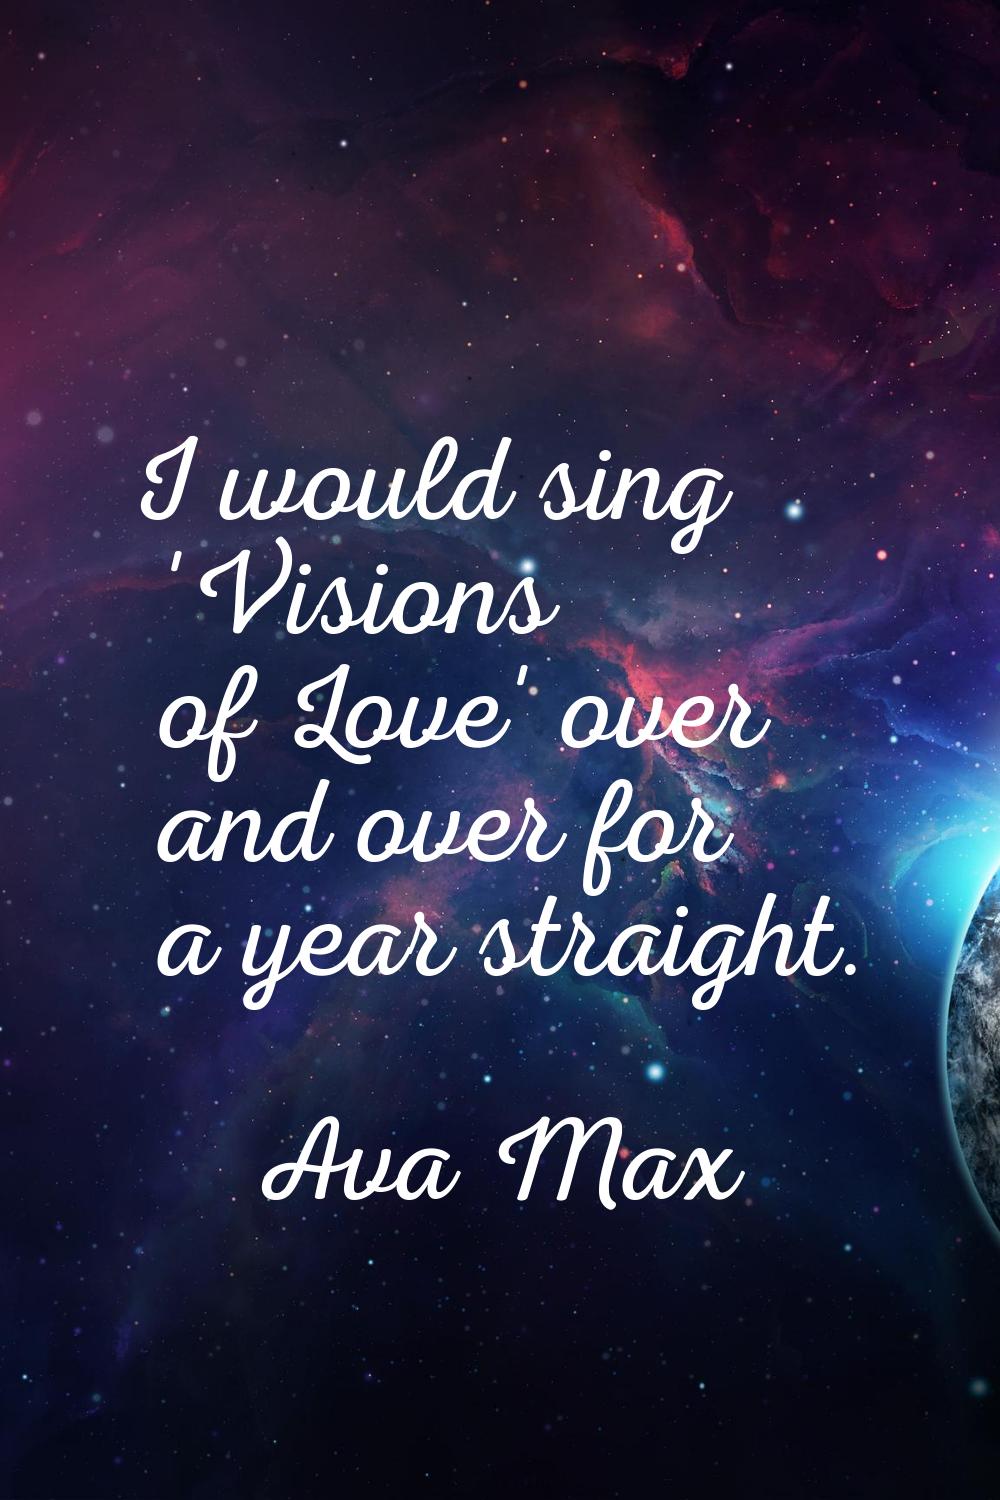 I would sing 'Visions of Love' over and over for a year straight.